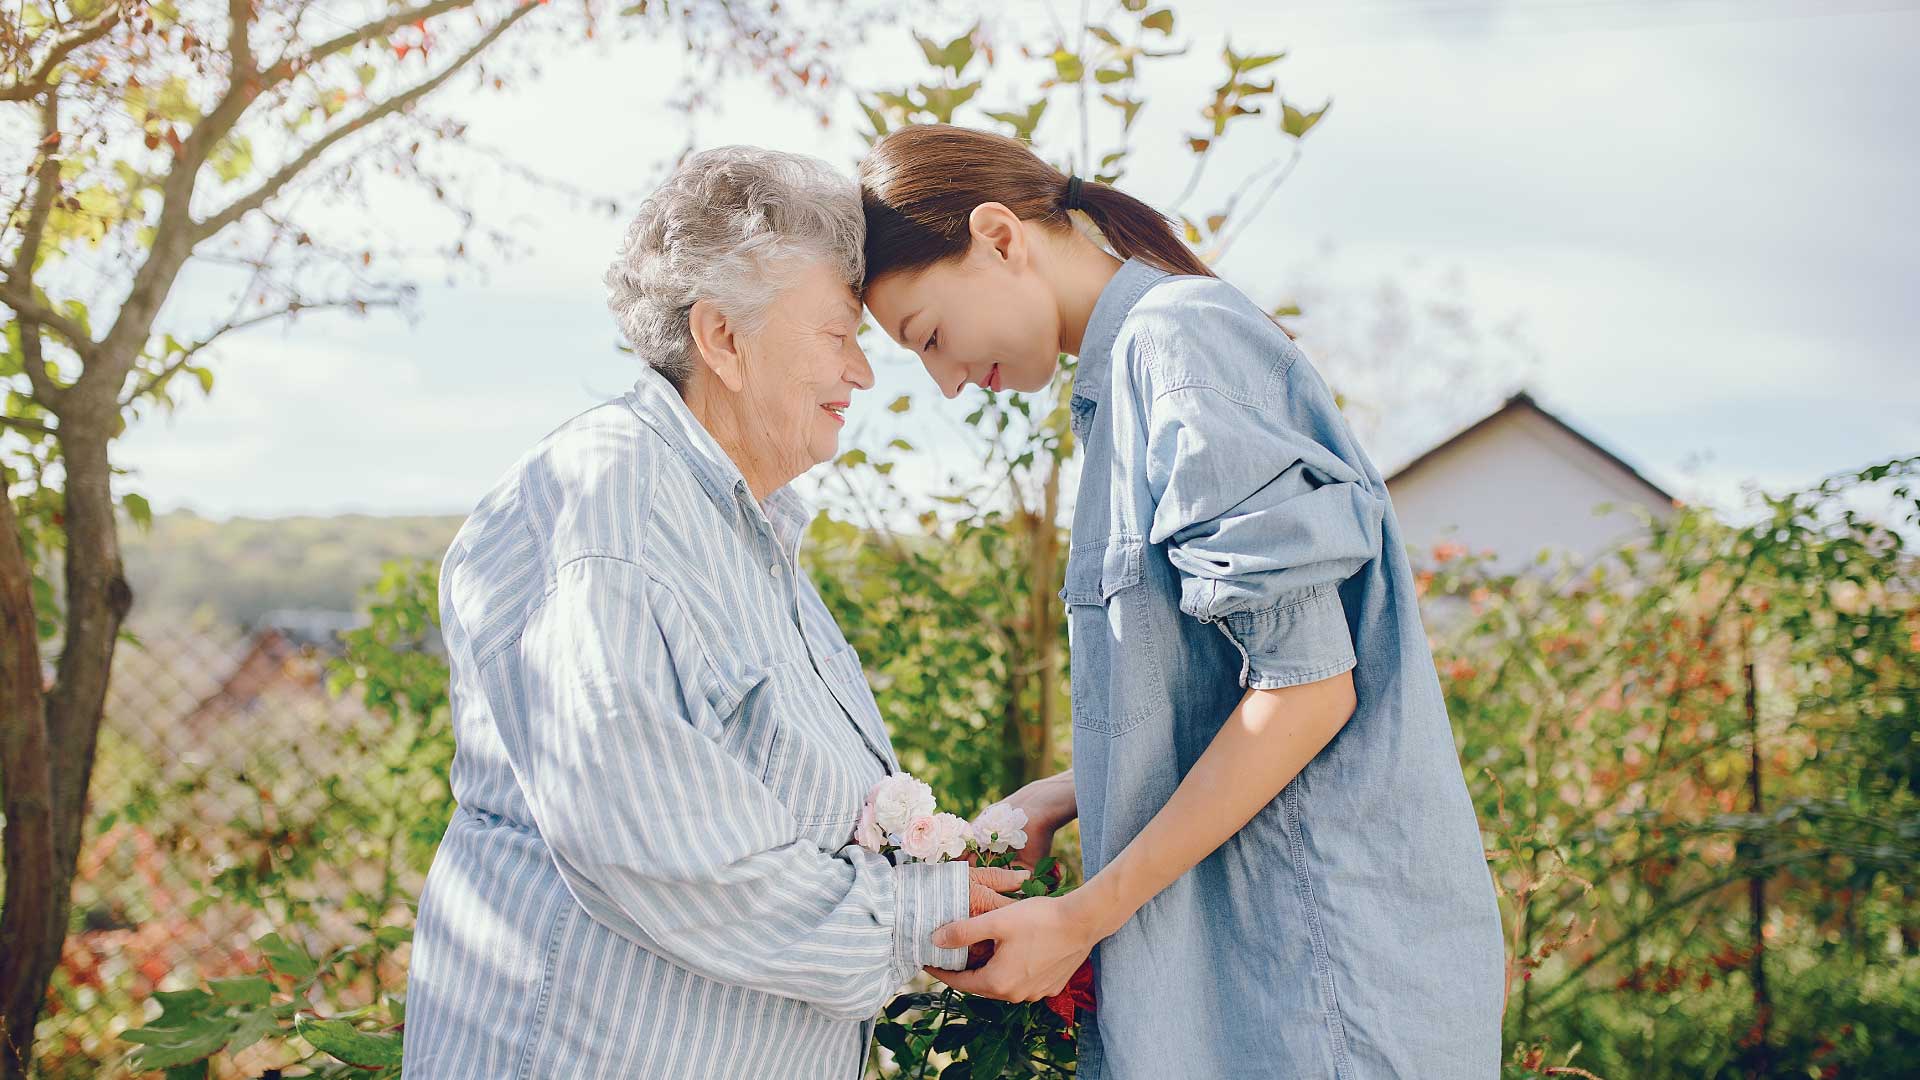 caring someone with dementia